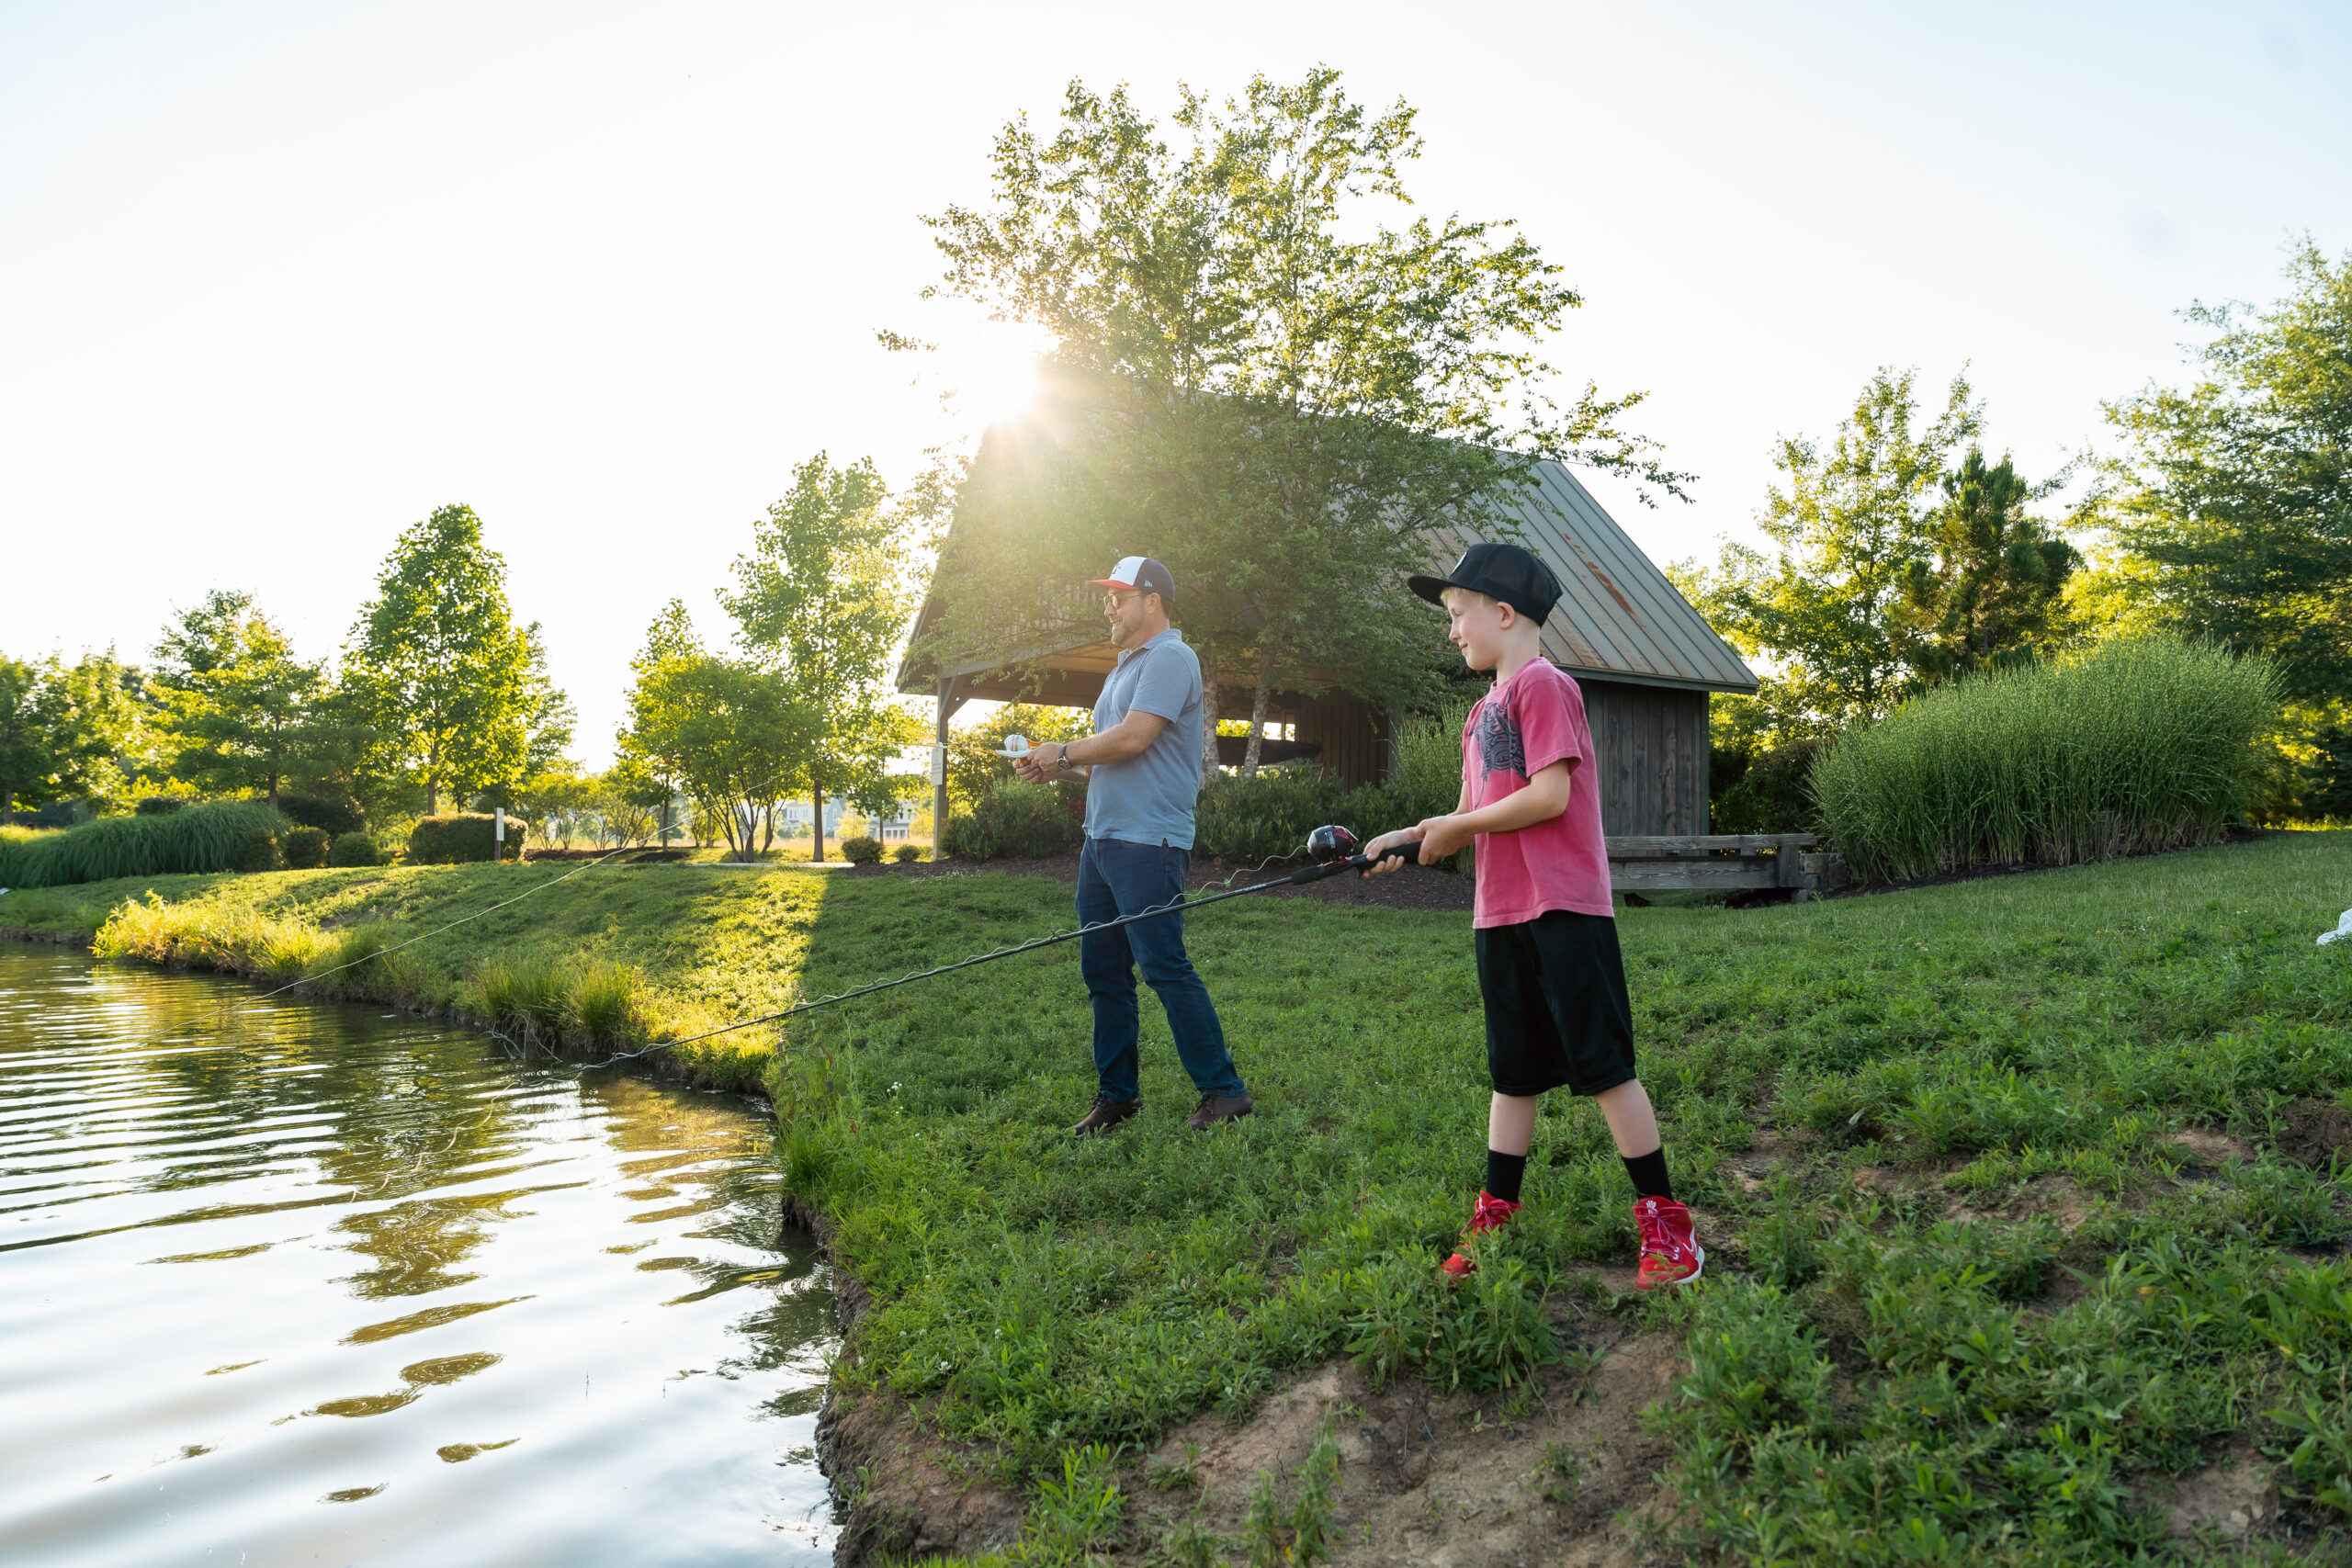 personal branding photo for realtors showing a male realtor going fishing with his son in a community park